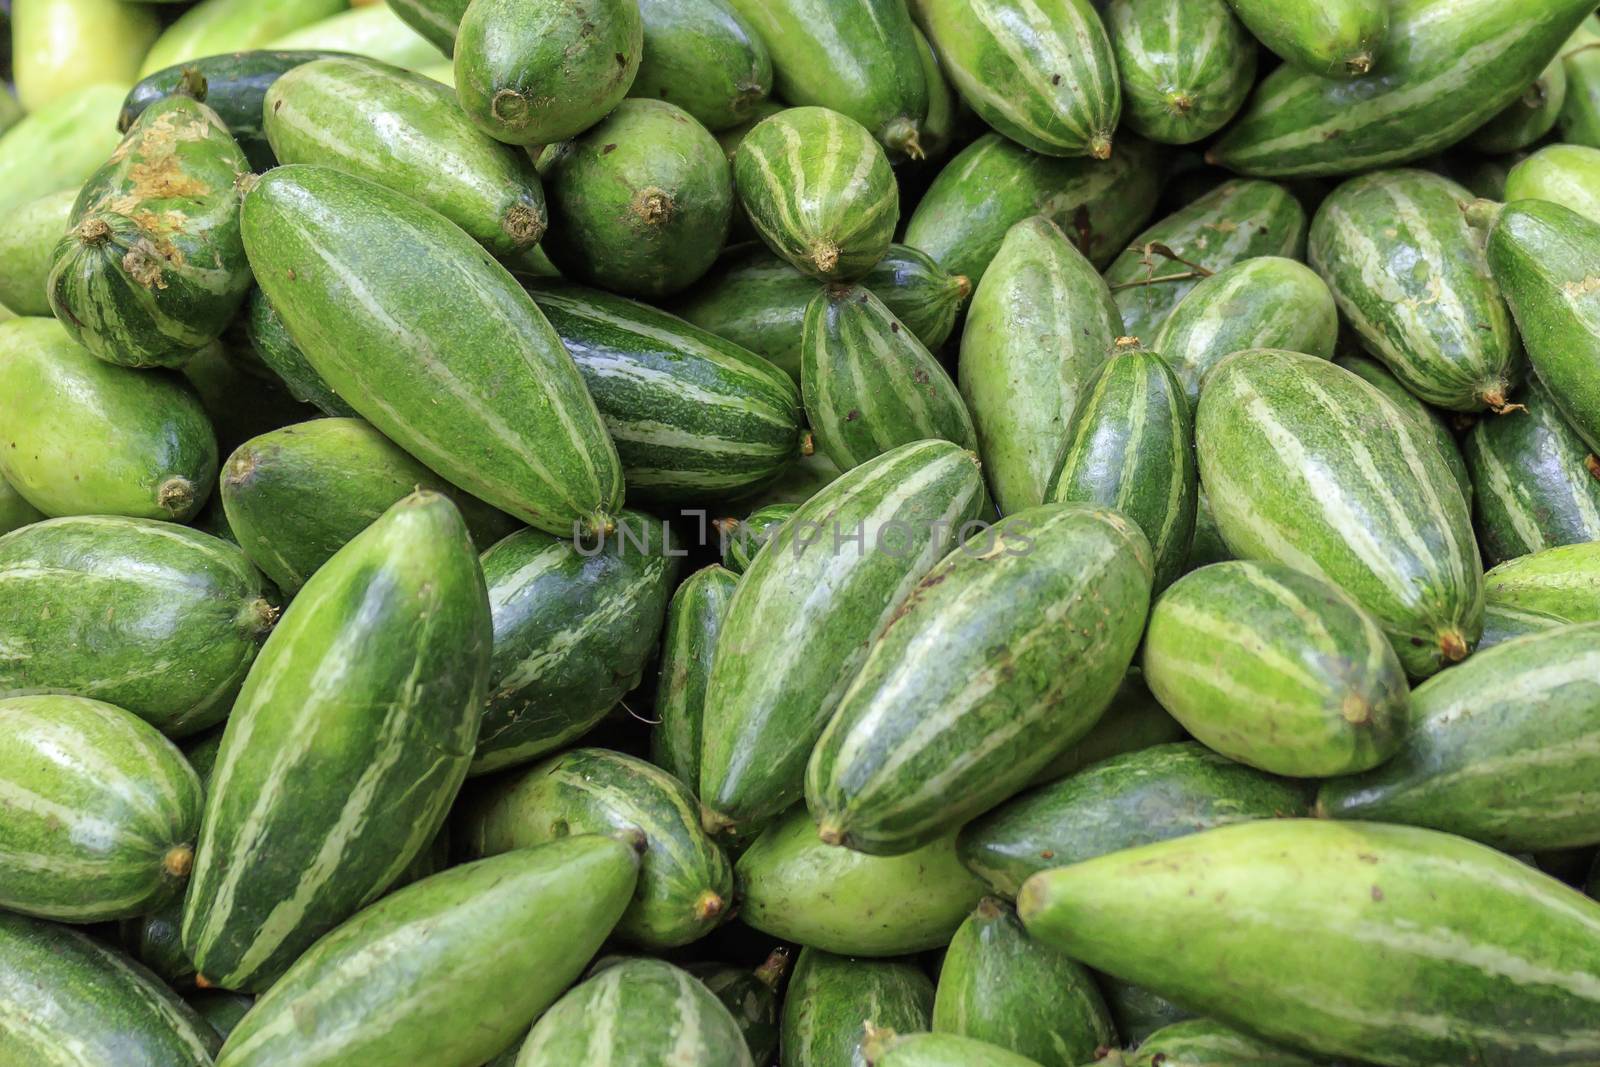 Indian vegetable-pointed gourd it is often called green potato.